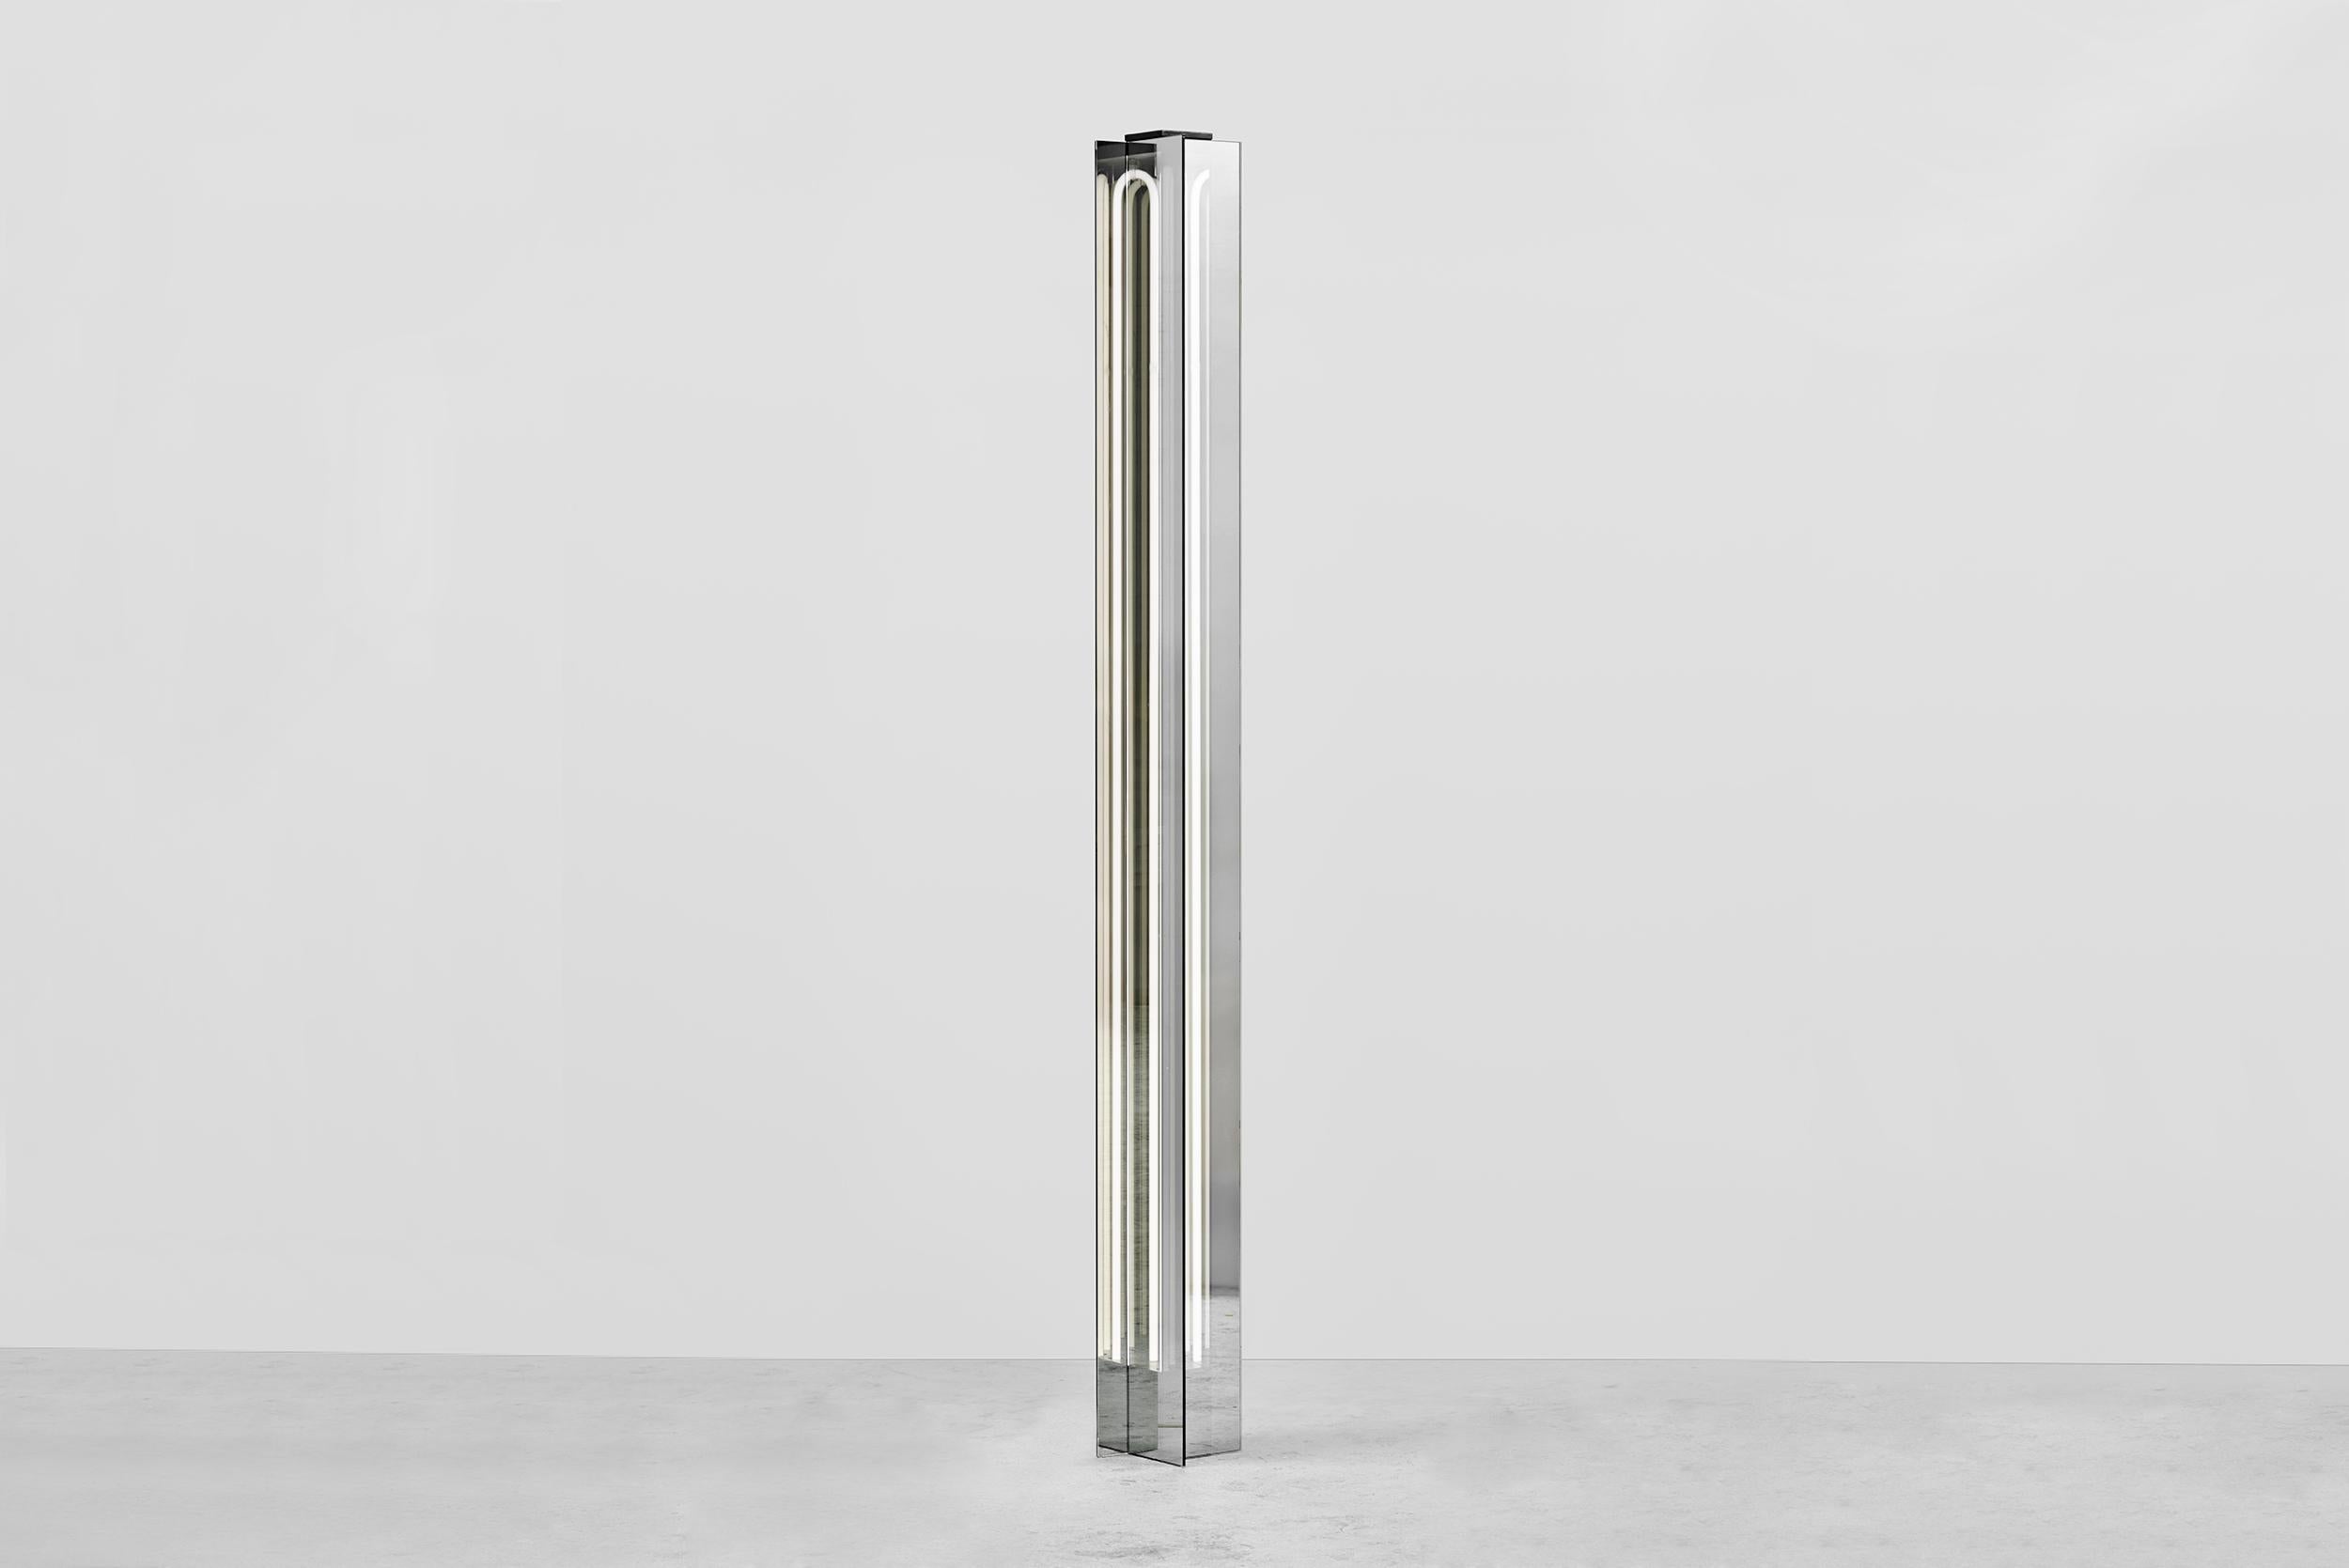 Sabine Marcelis Floor Lamp “Pillar” Tall 
From the series “No Fear of Glass”
Manufactured by Sabine Marcelis
Produced in exclusive for Side Gallery
Rotterdam, The Netherlands 2019
Two way mirror, Glass neon lights, Neon